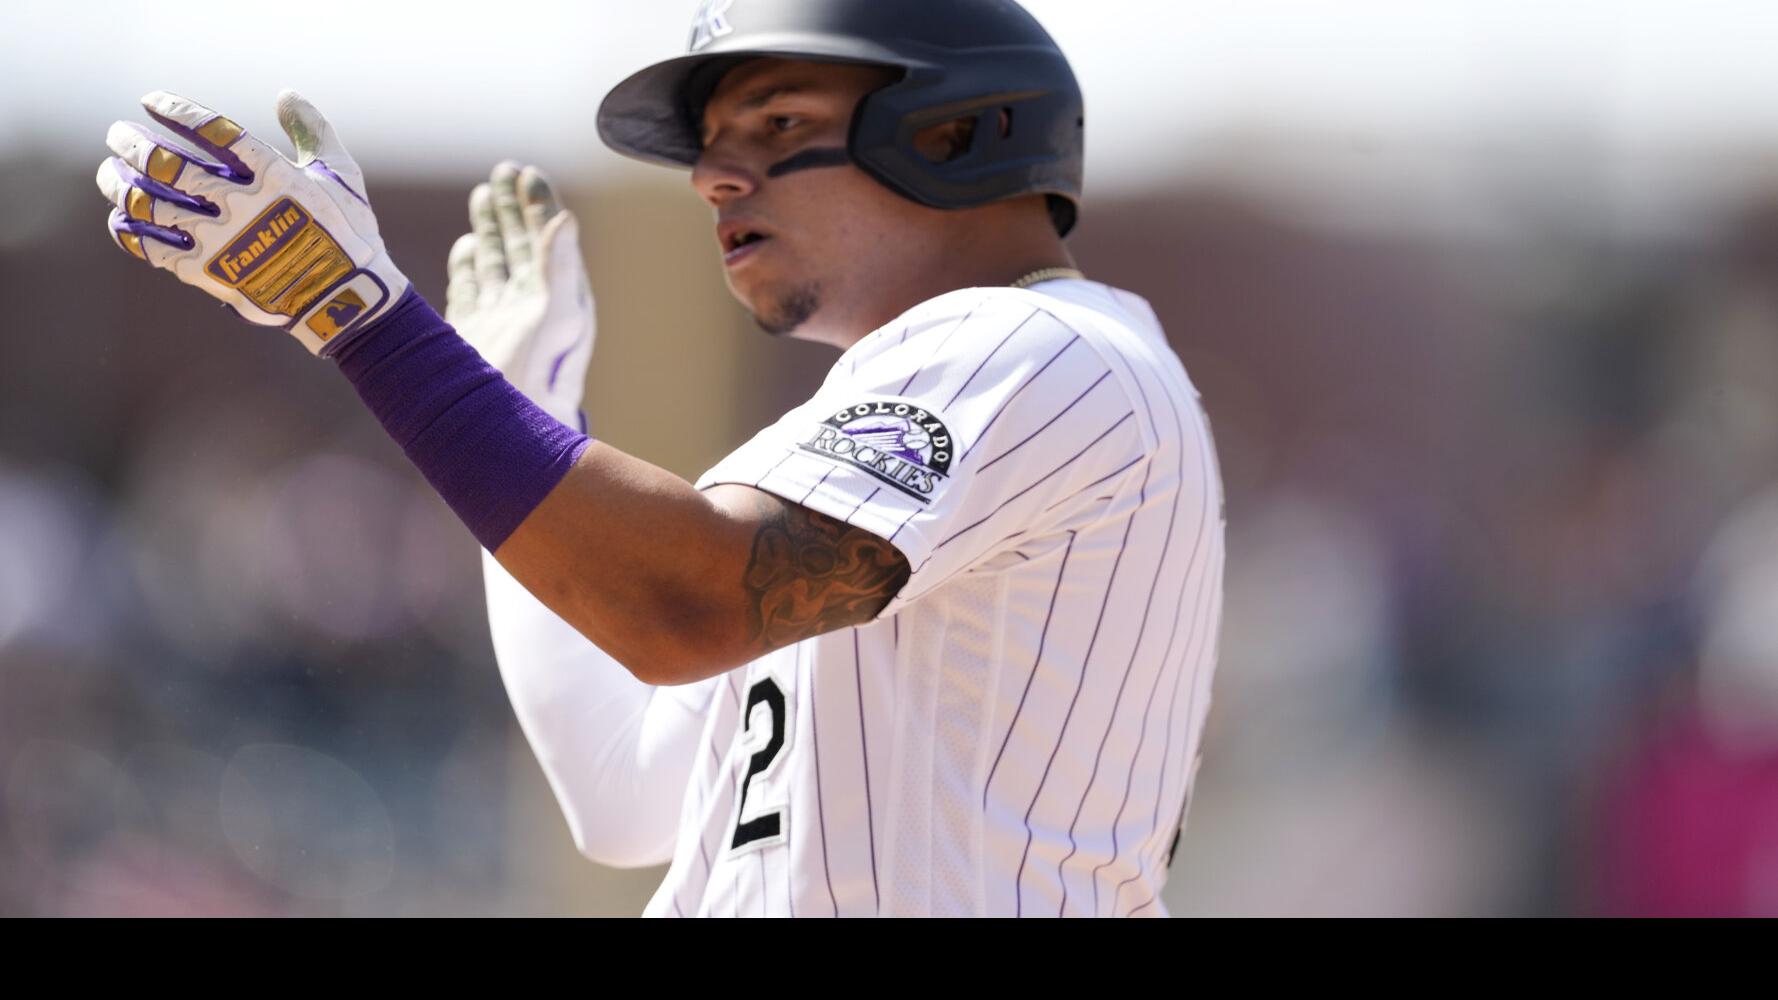 He's making a statement': Rockies' Yonathan Daza thriving with